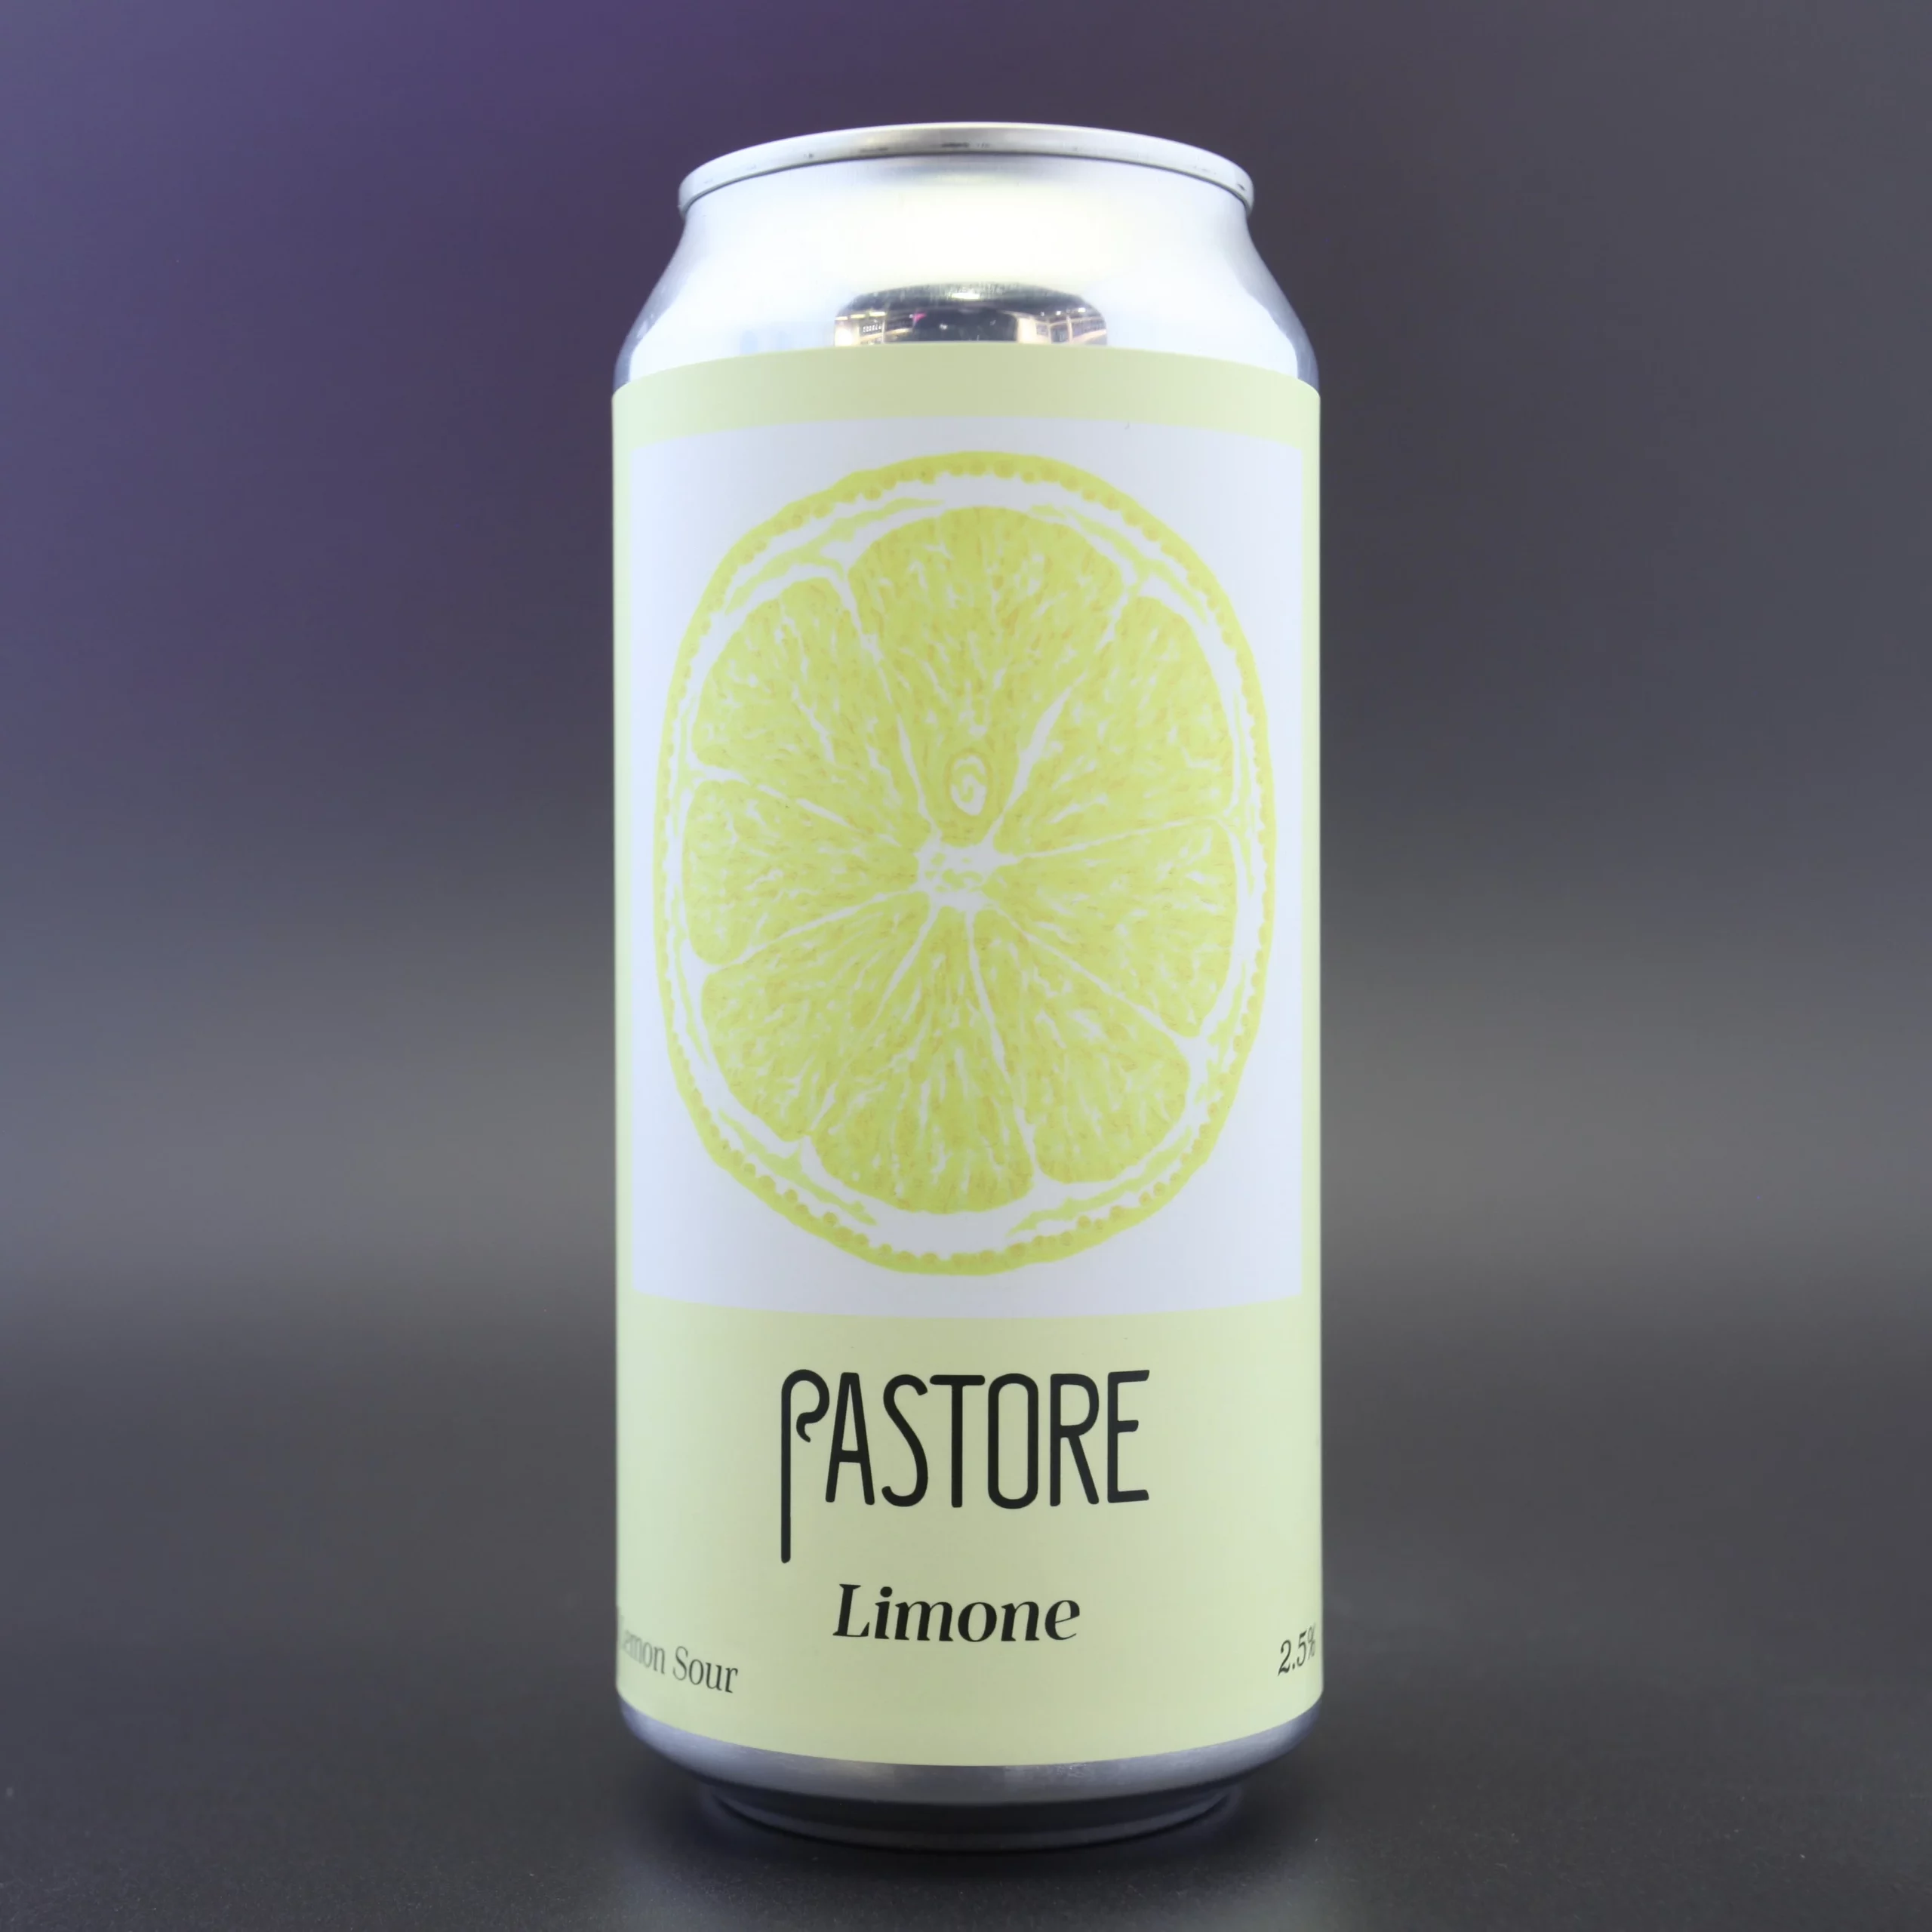 Pastore Limone session sour beer from Ghost Whale. 